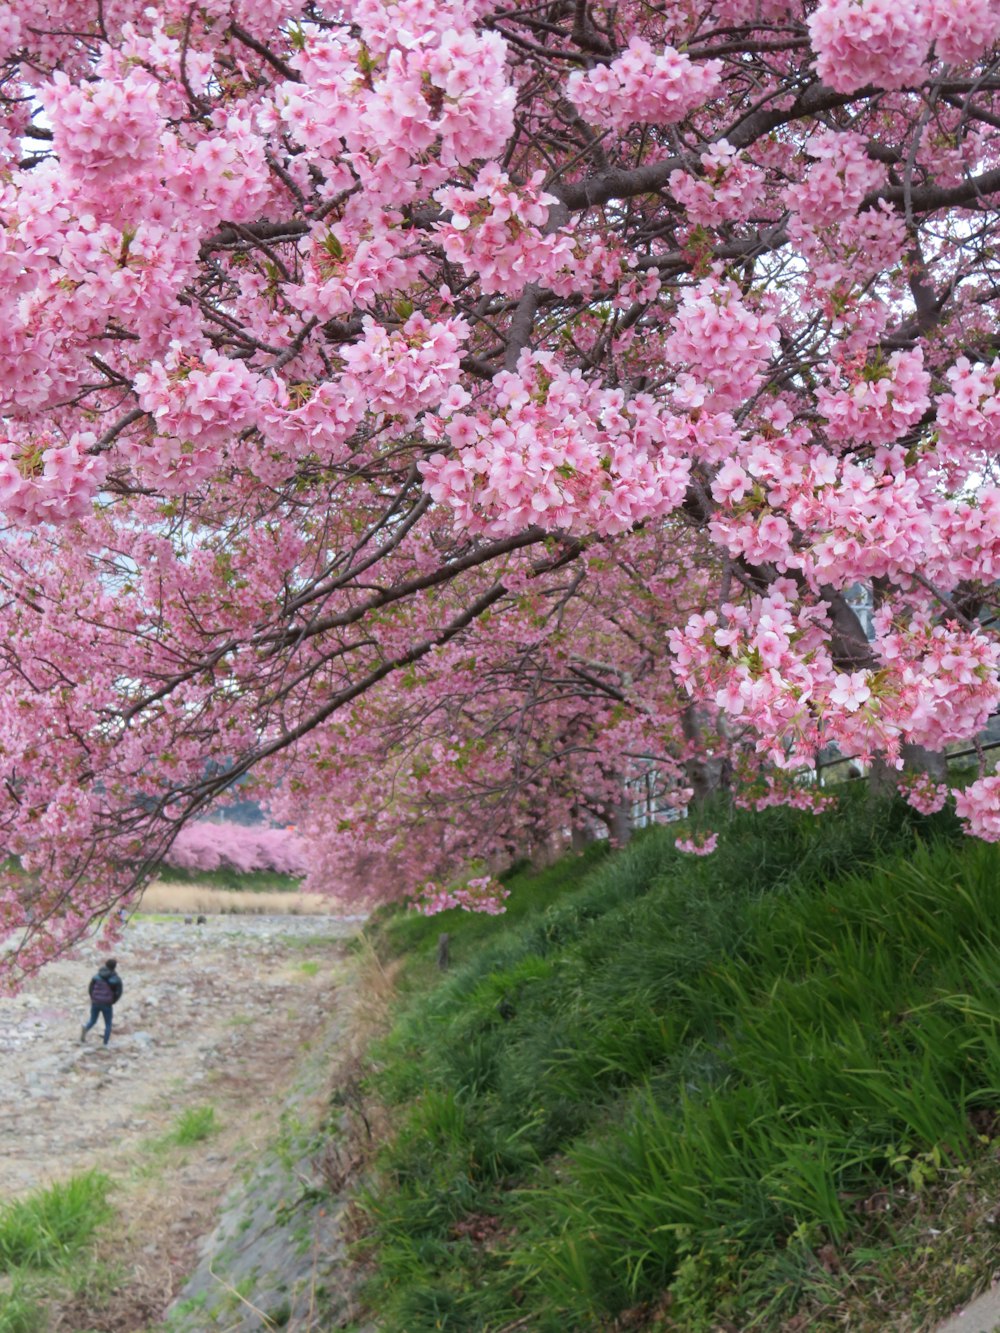 a person walking down a path under a tree with pink flowers